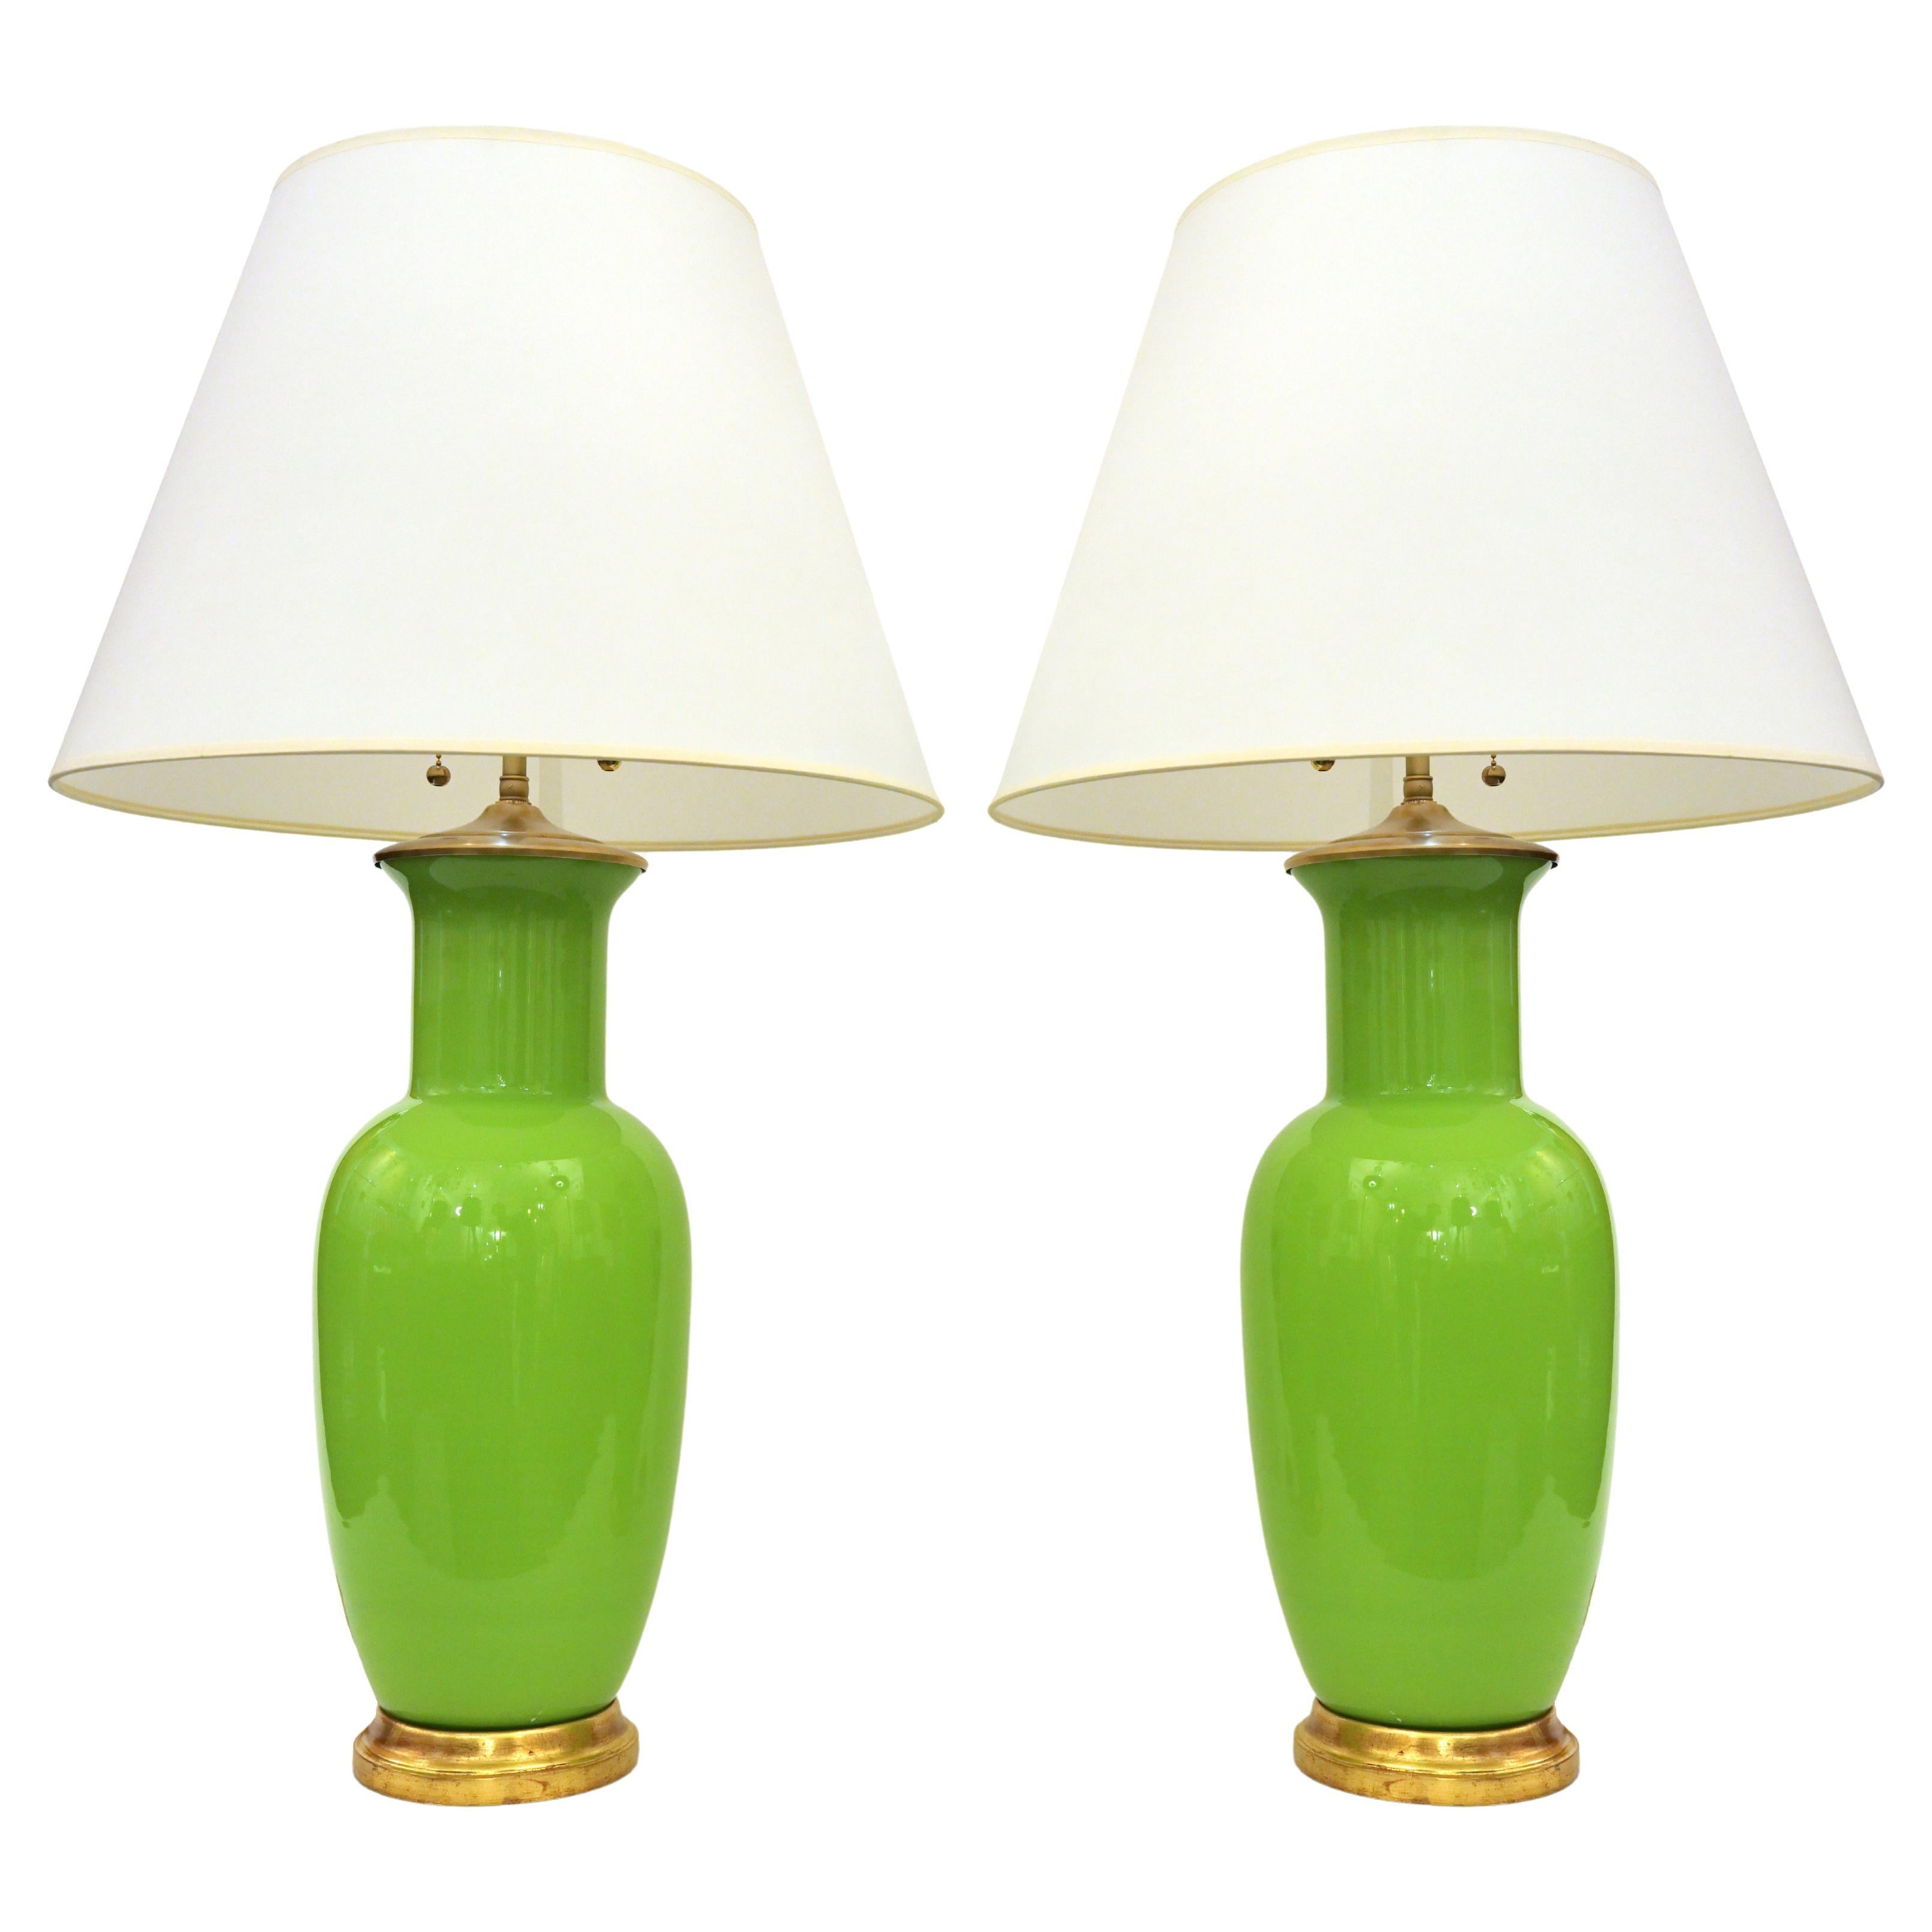 Pair of Apple Green Murano Glass Table Lamps by David Duncan Studio For Sale